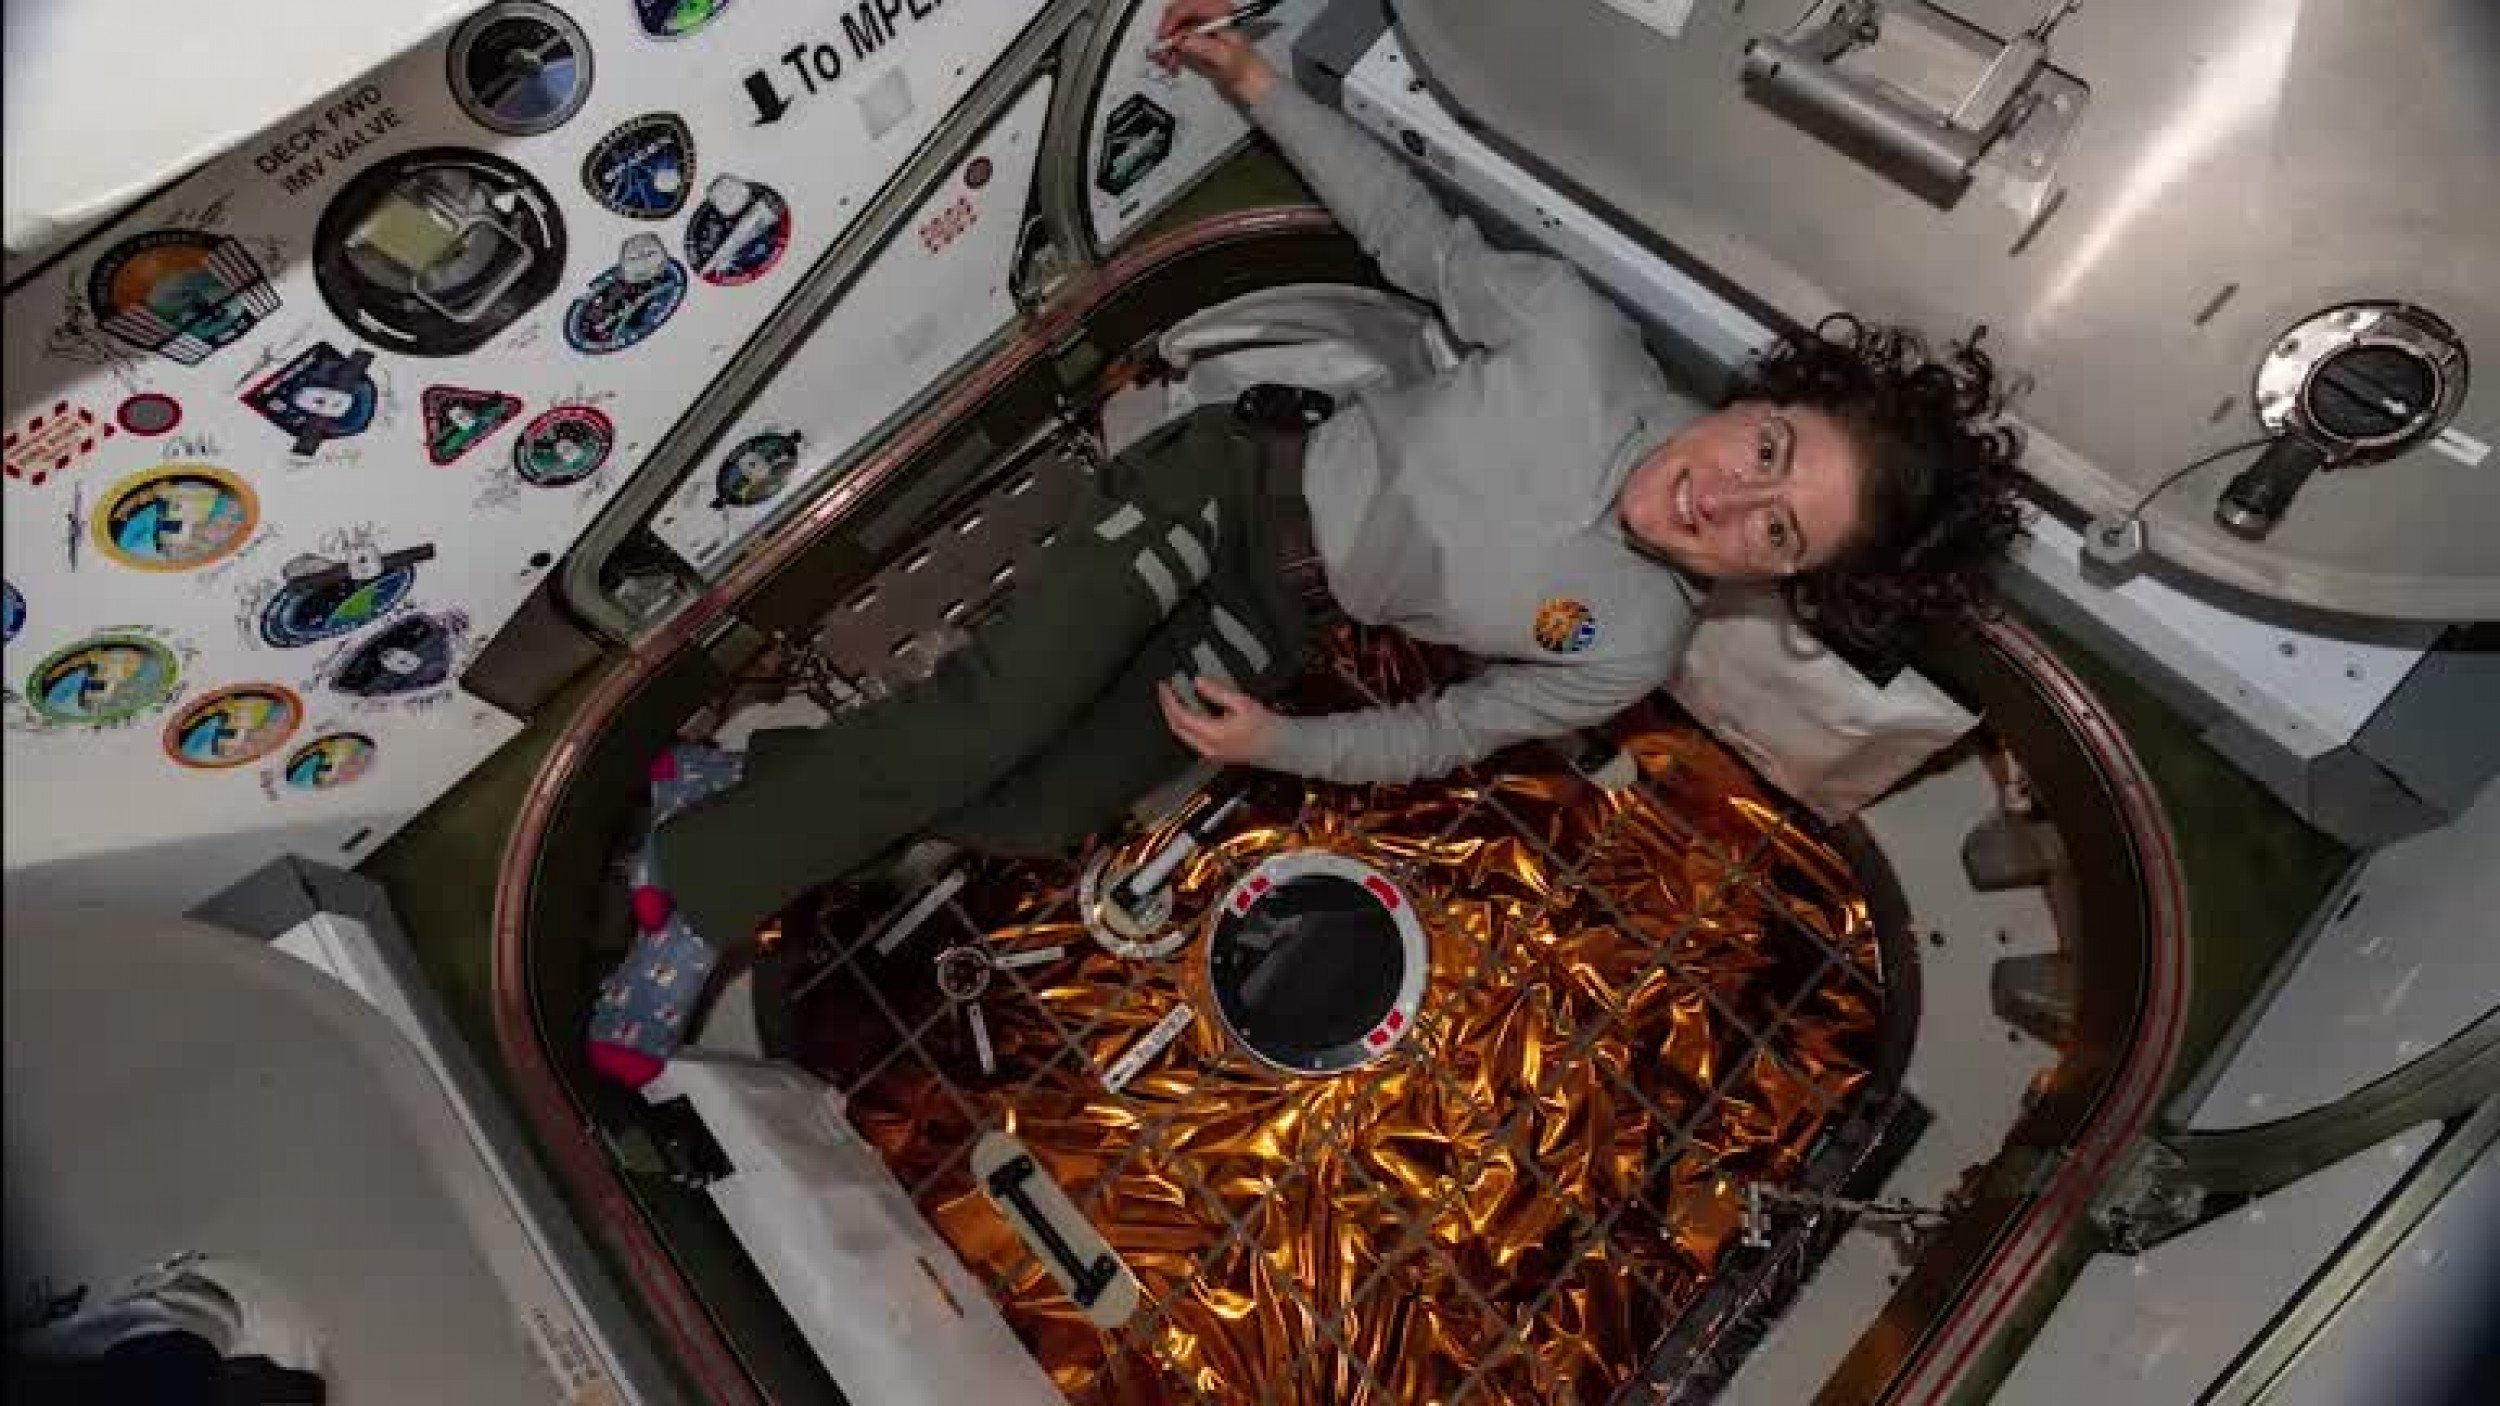 NASAs Christina Koch Set To Return To Earth After Record-Breaking Stint On ISS